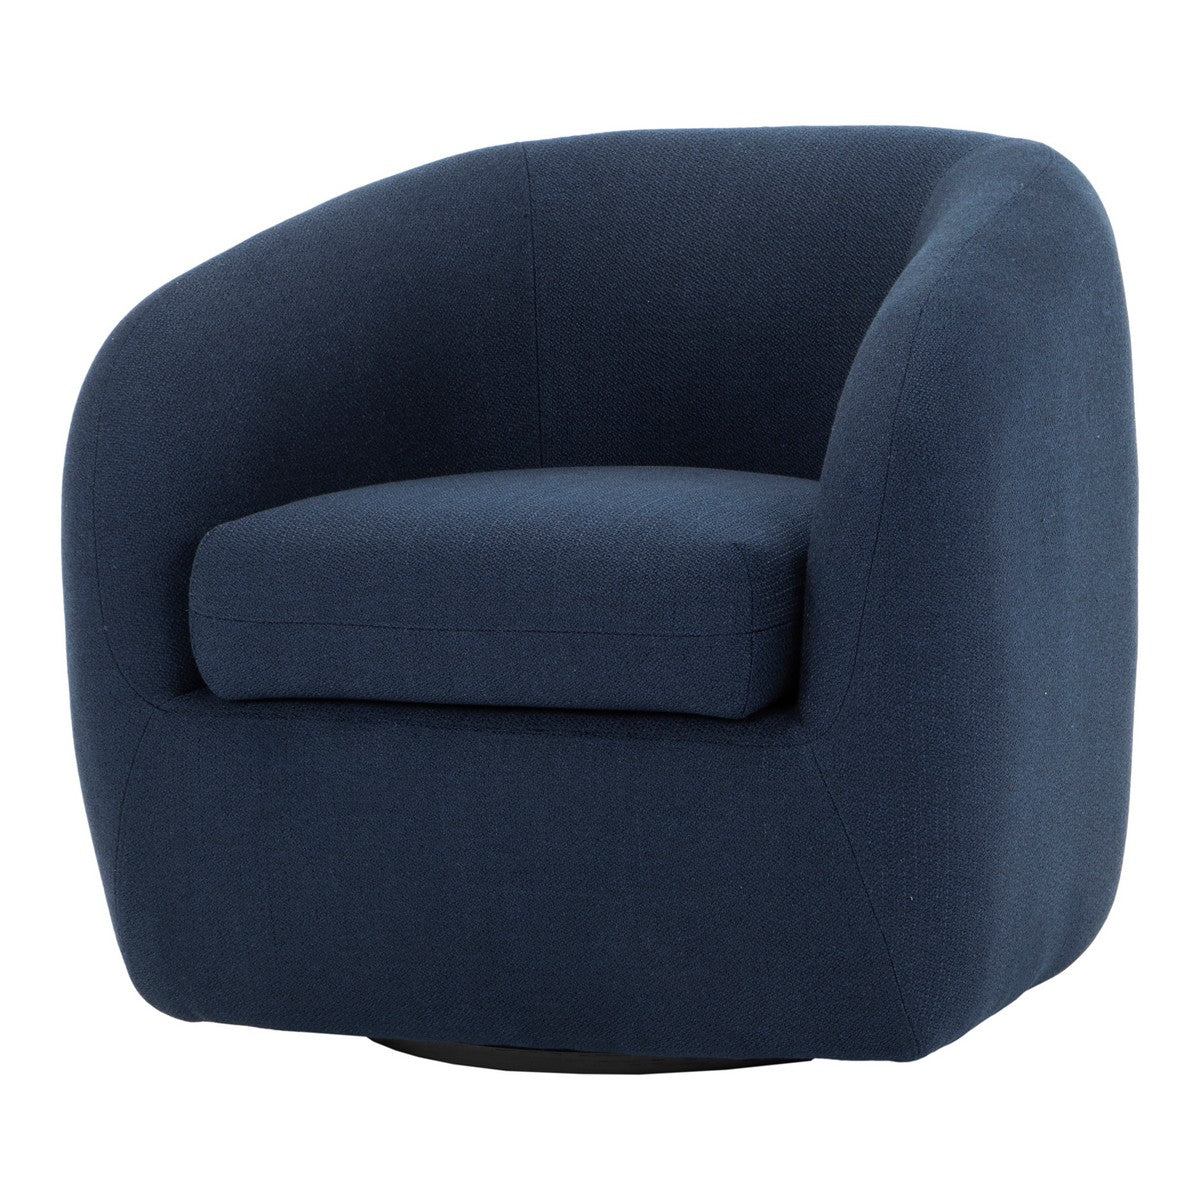 Moe's Home Collection Maurice Swivel Chair Midnight Blue - JM-1003-46